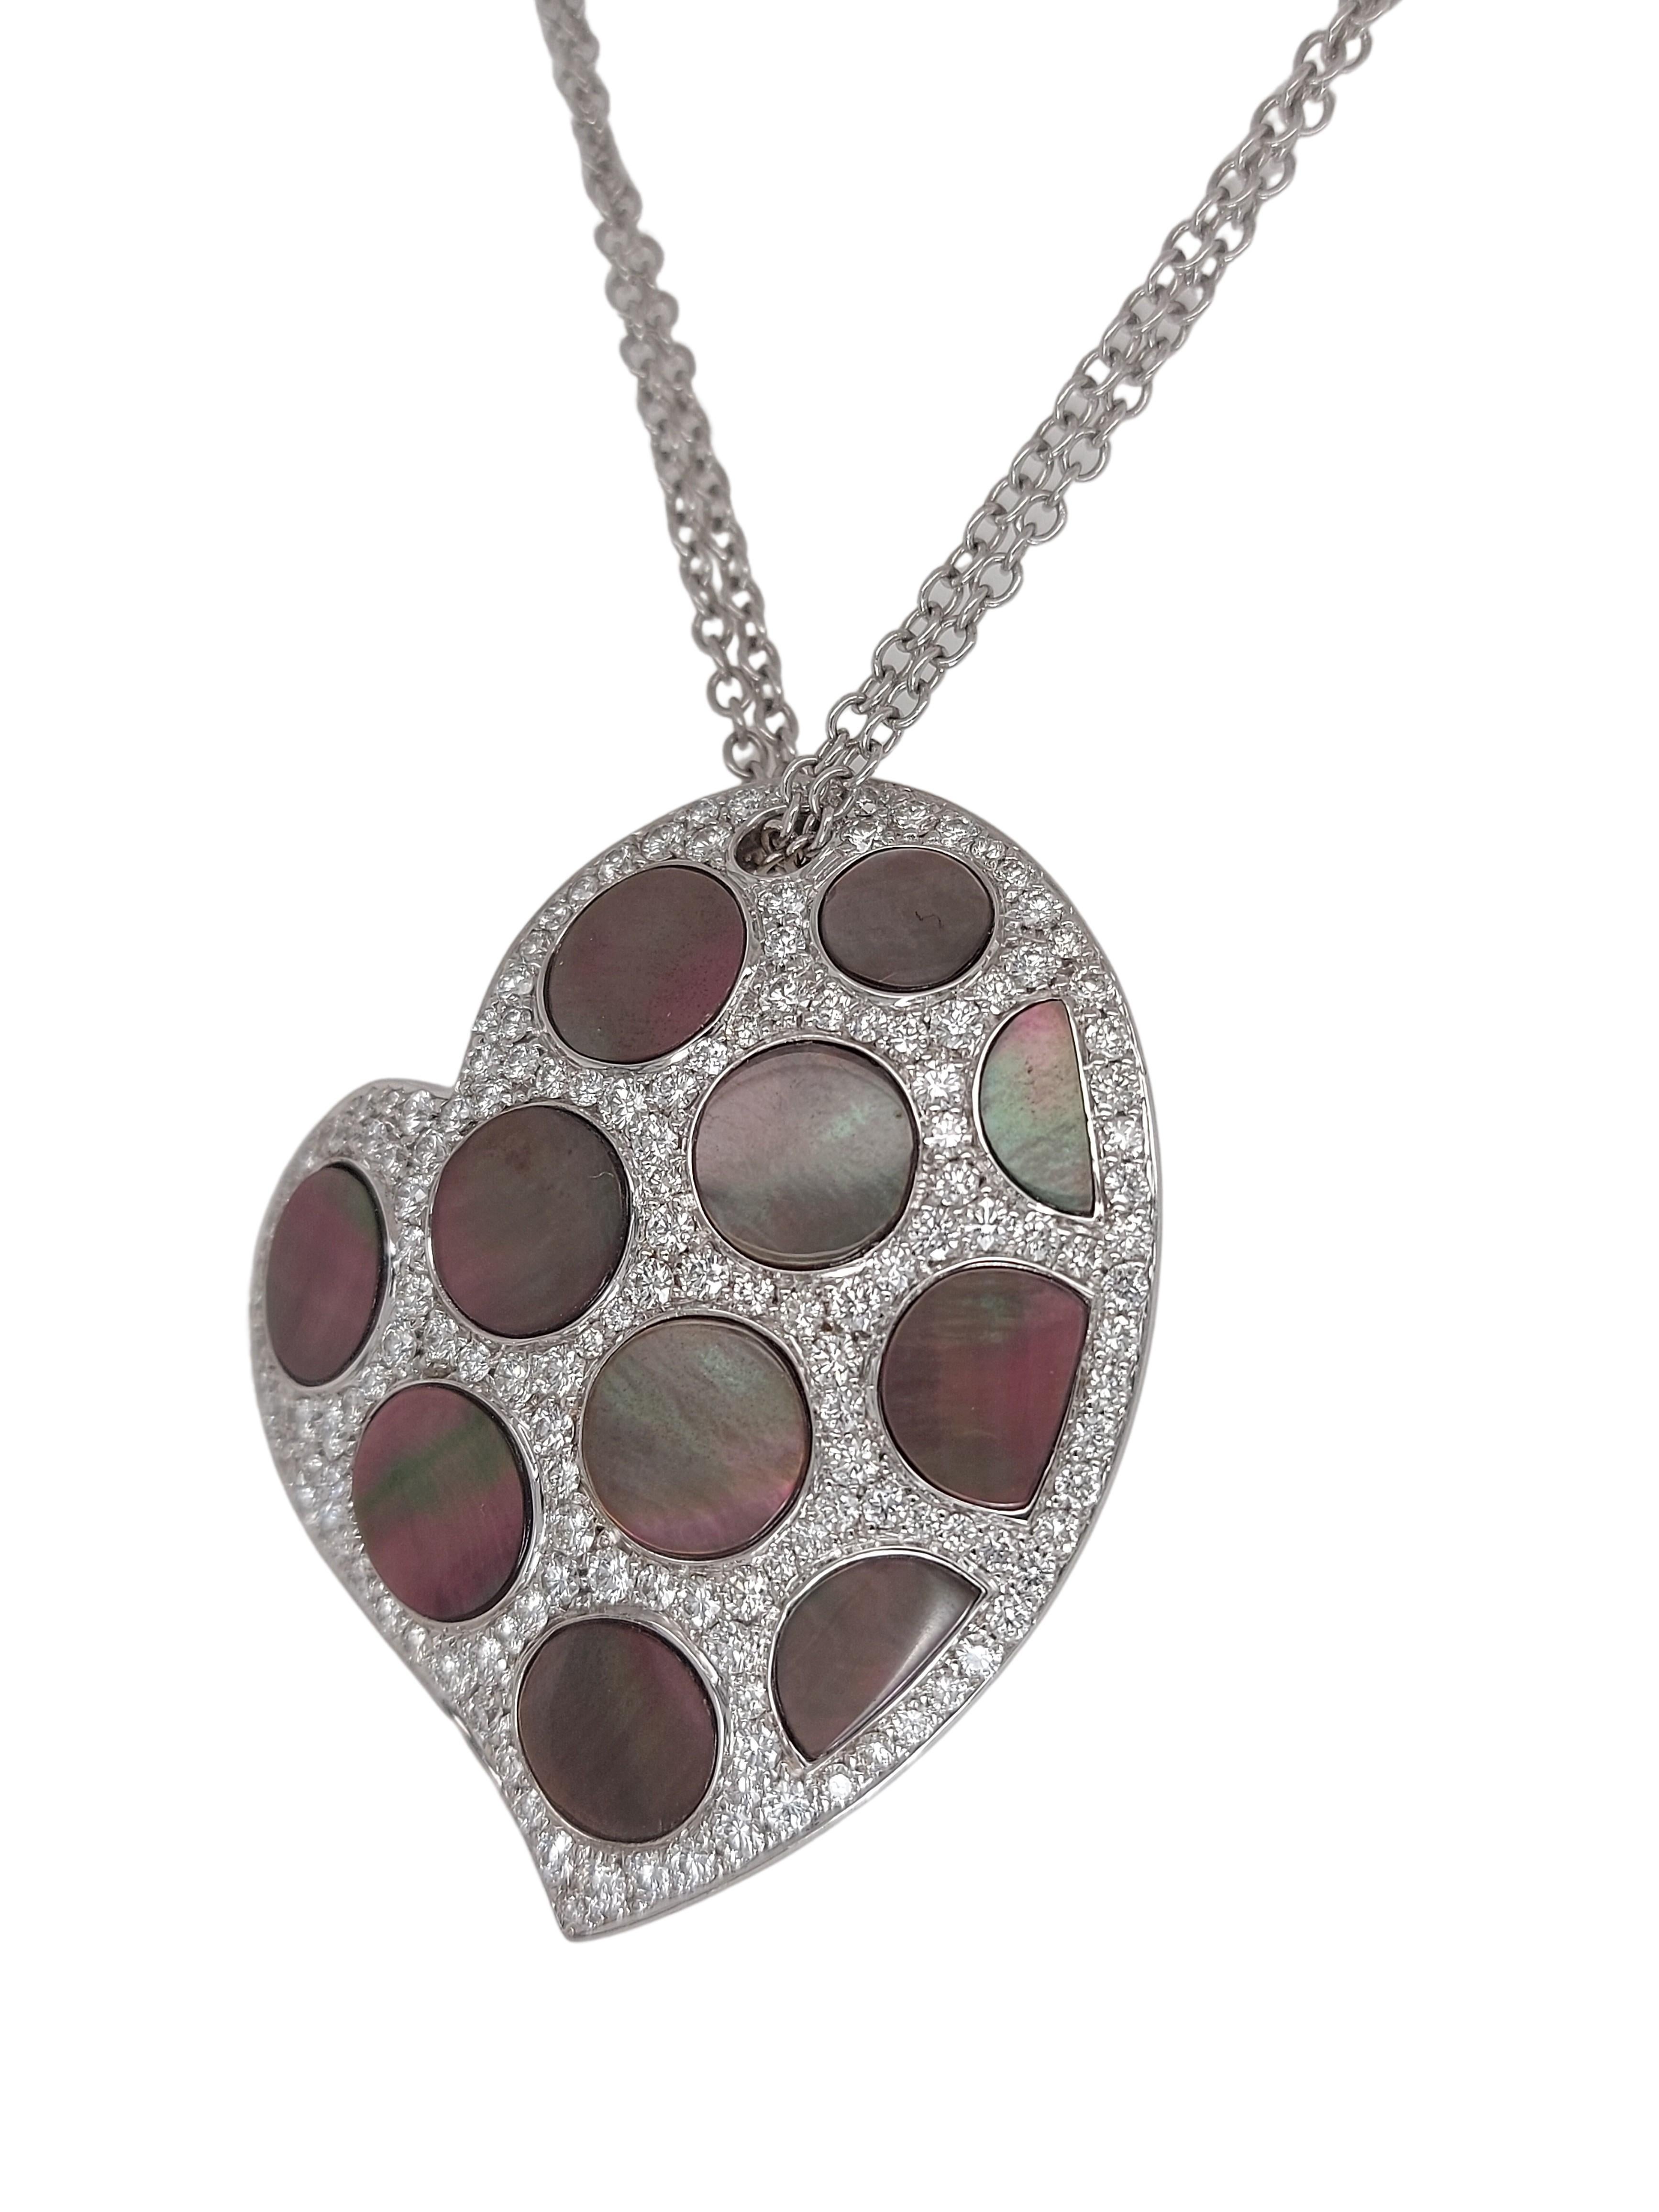 Artisan Gorgeous 18kt White Gold Diamond Pendant Necklace & Black Mother of Pearl For Sale